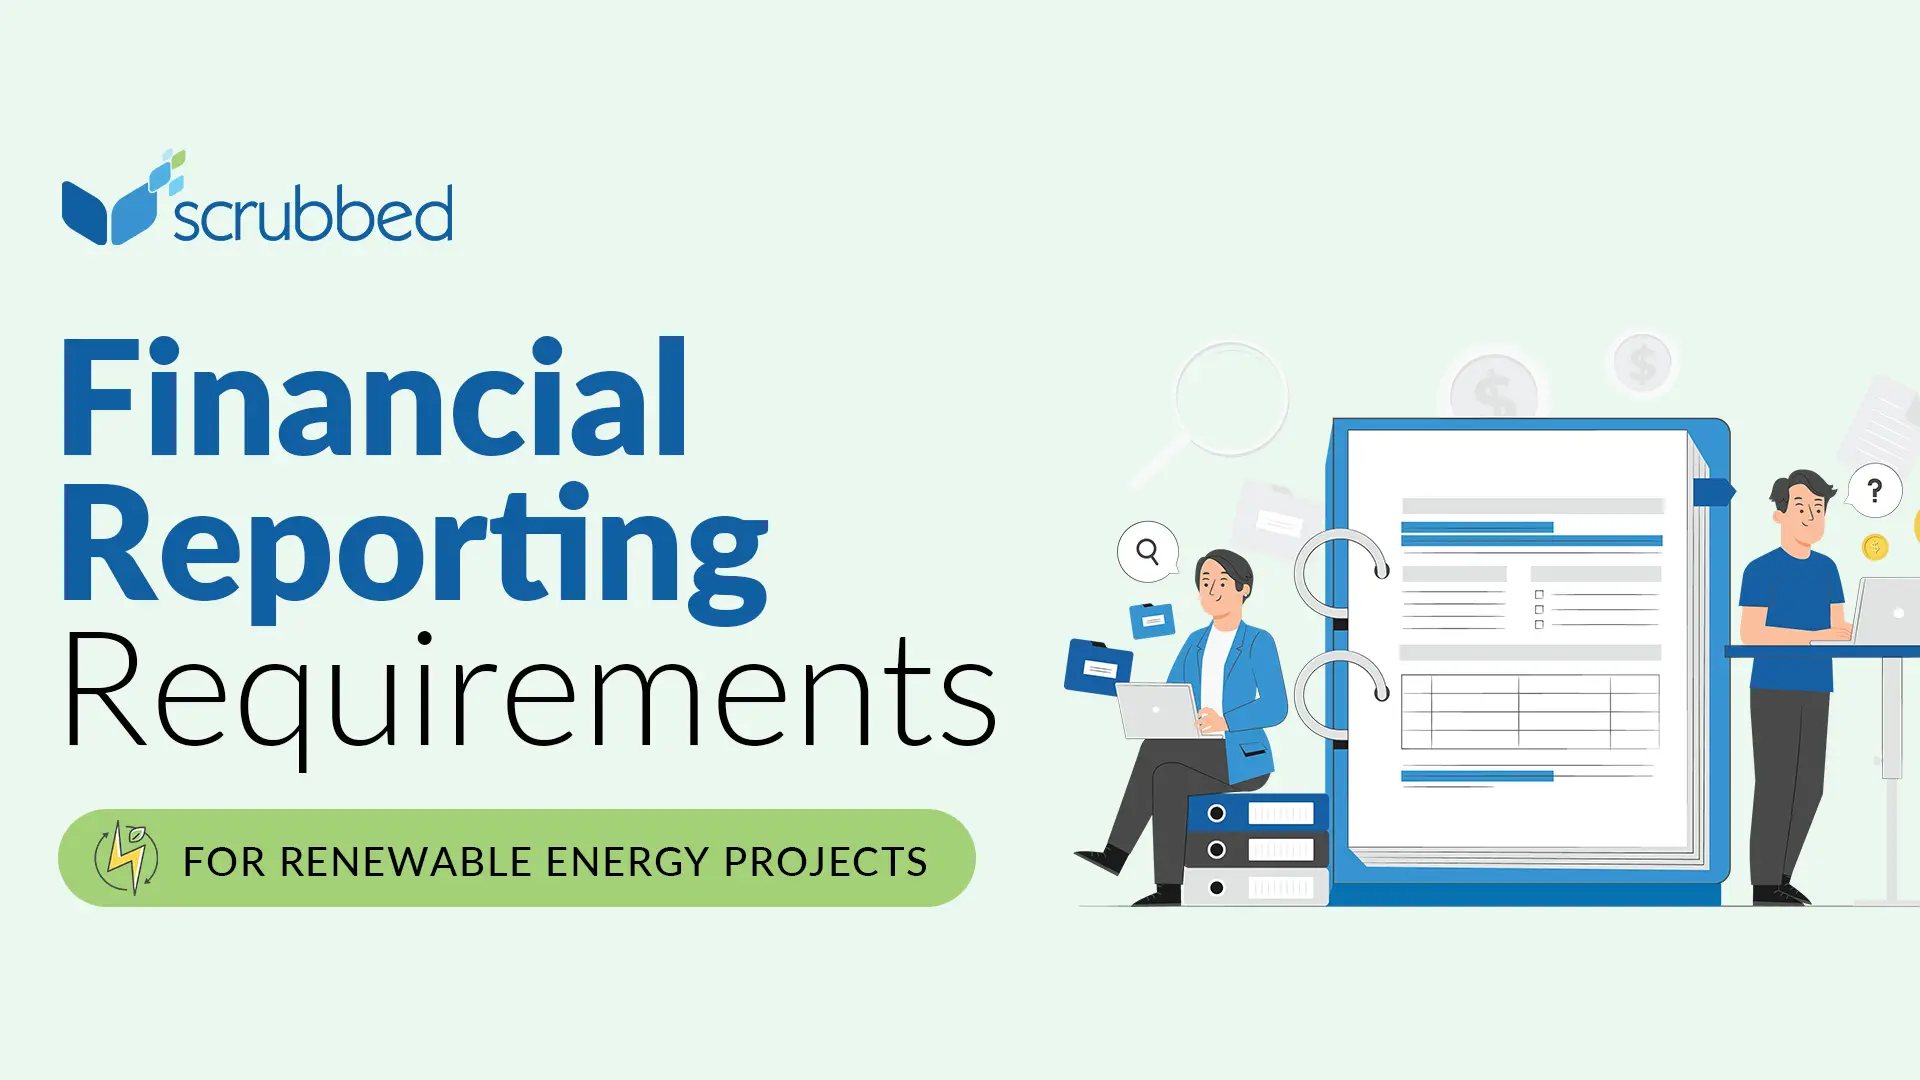 What are the financial reporting requirements for renewable energy projects, and how can we ensure compliance with relevant accounting standards and regulations?